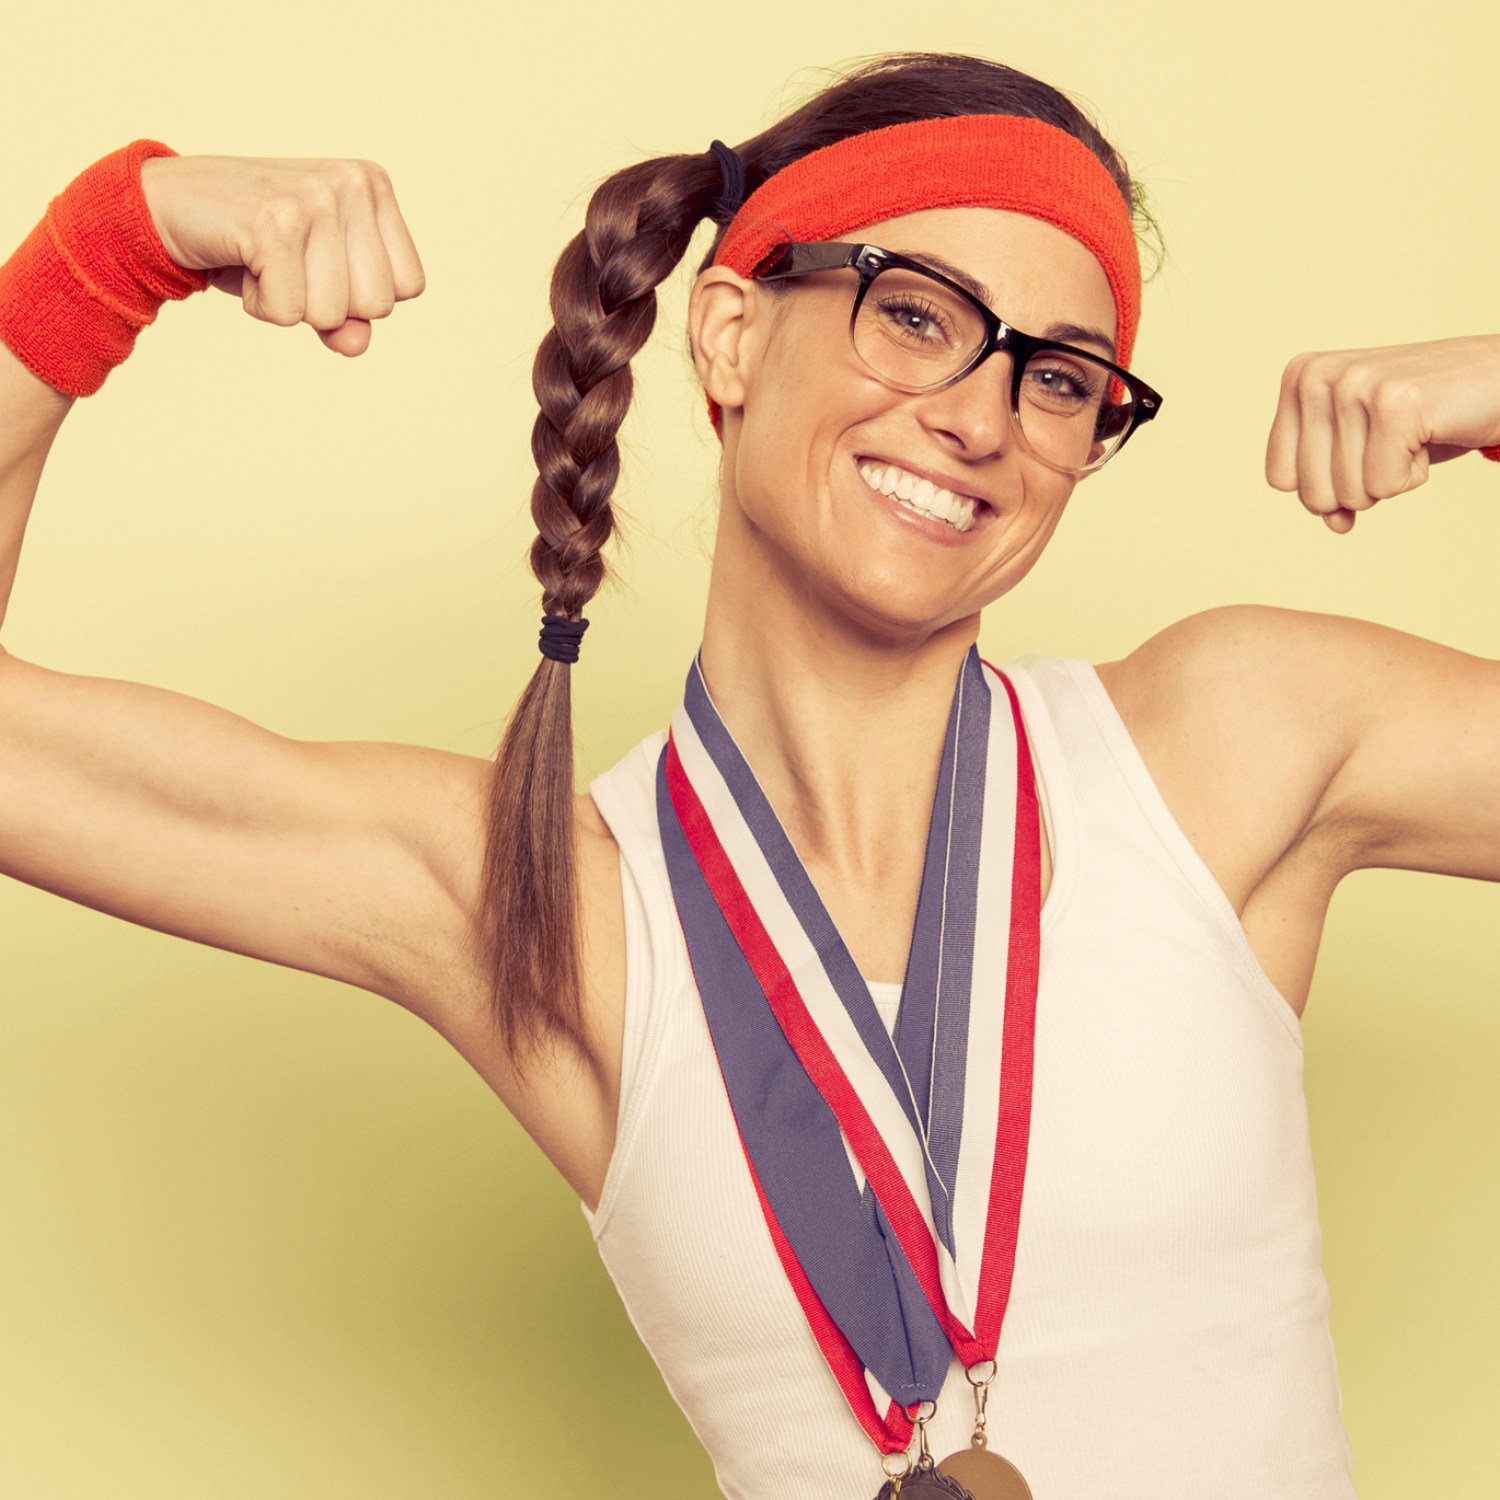 Woman with glassesin workout gear with medals flexing biceps